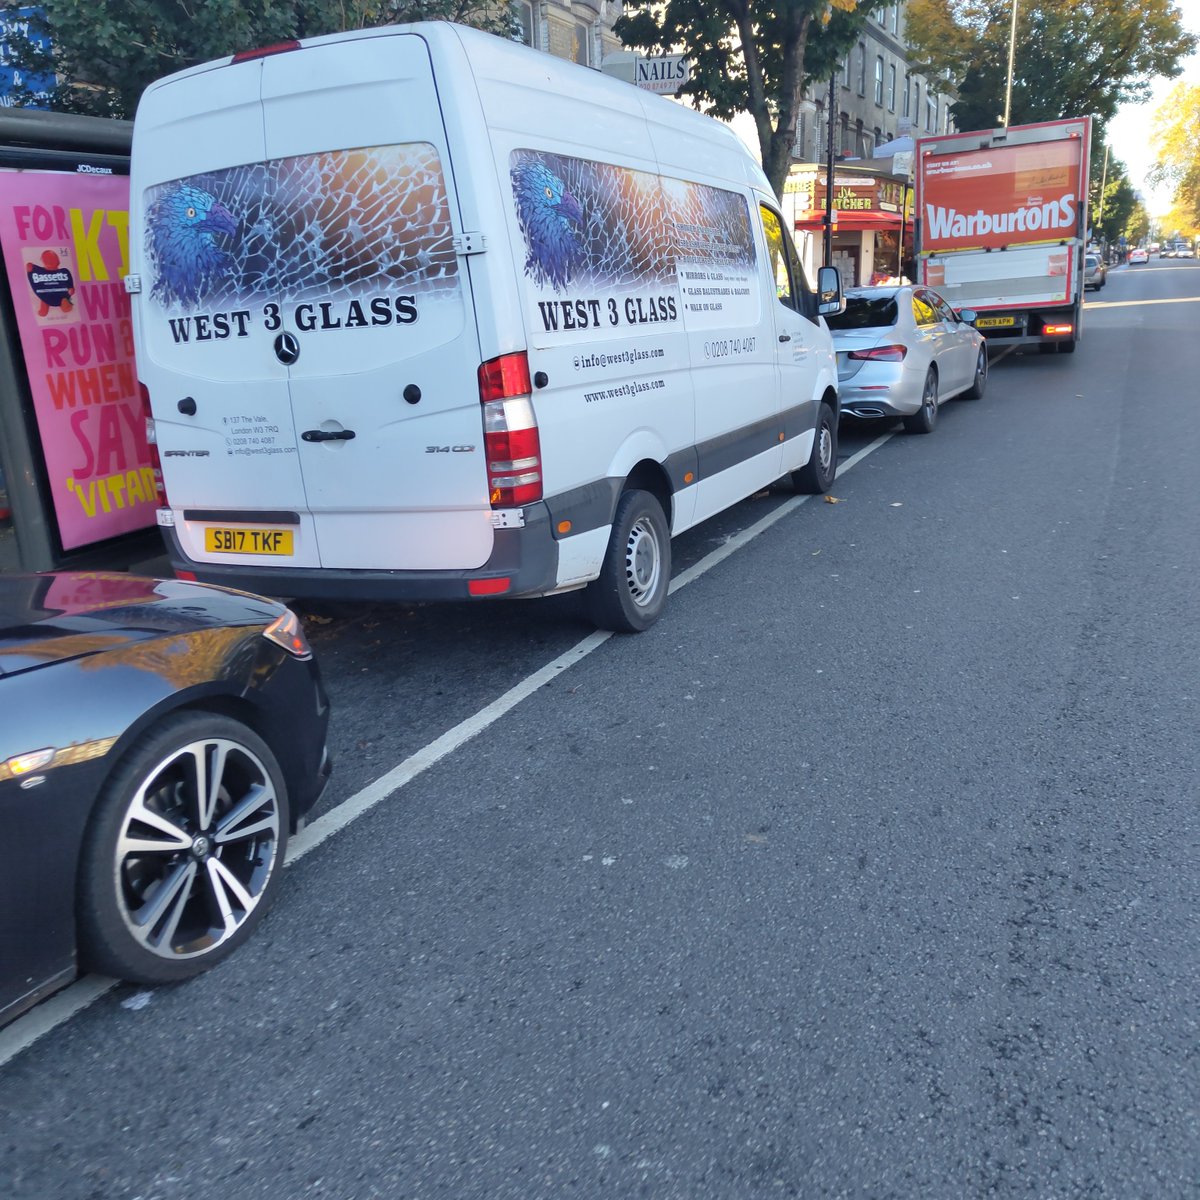 A4020 Uxbridge Road.

Bike lane.. Solid line..
@EalingCouncil seems comfortable that it's like this all day.

If businesses need this space for loading and deliveries, at least remove the lane so they can stop pretending it's a provision!